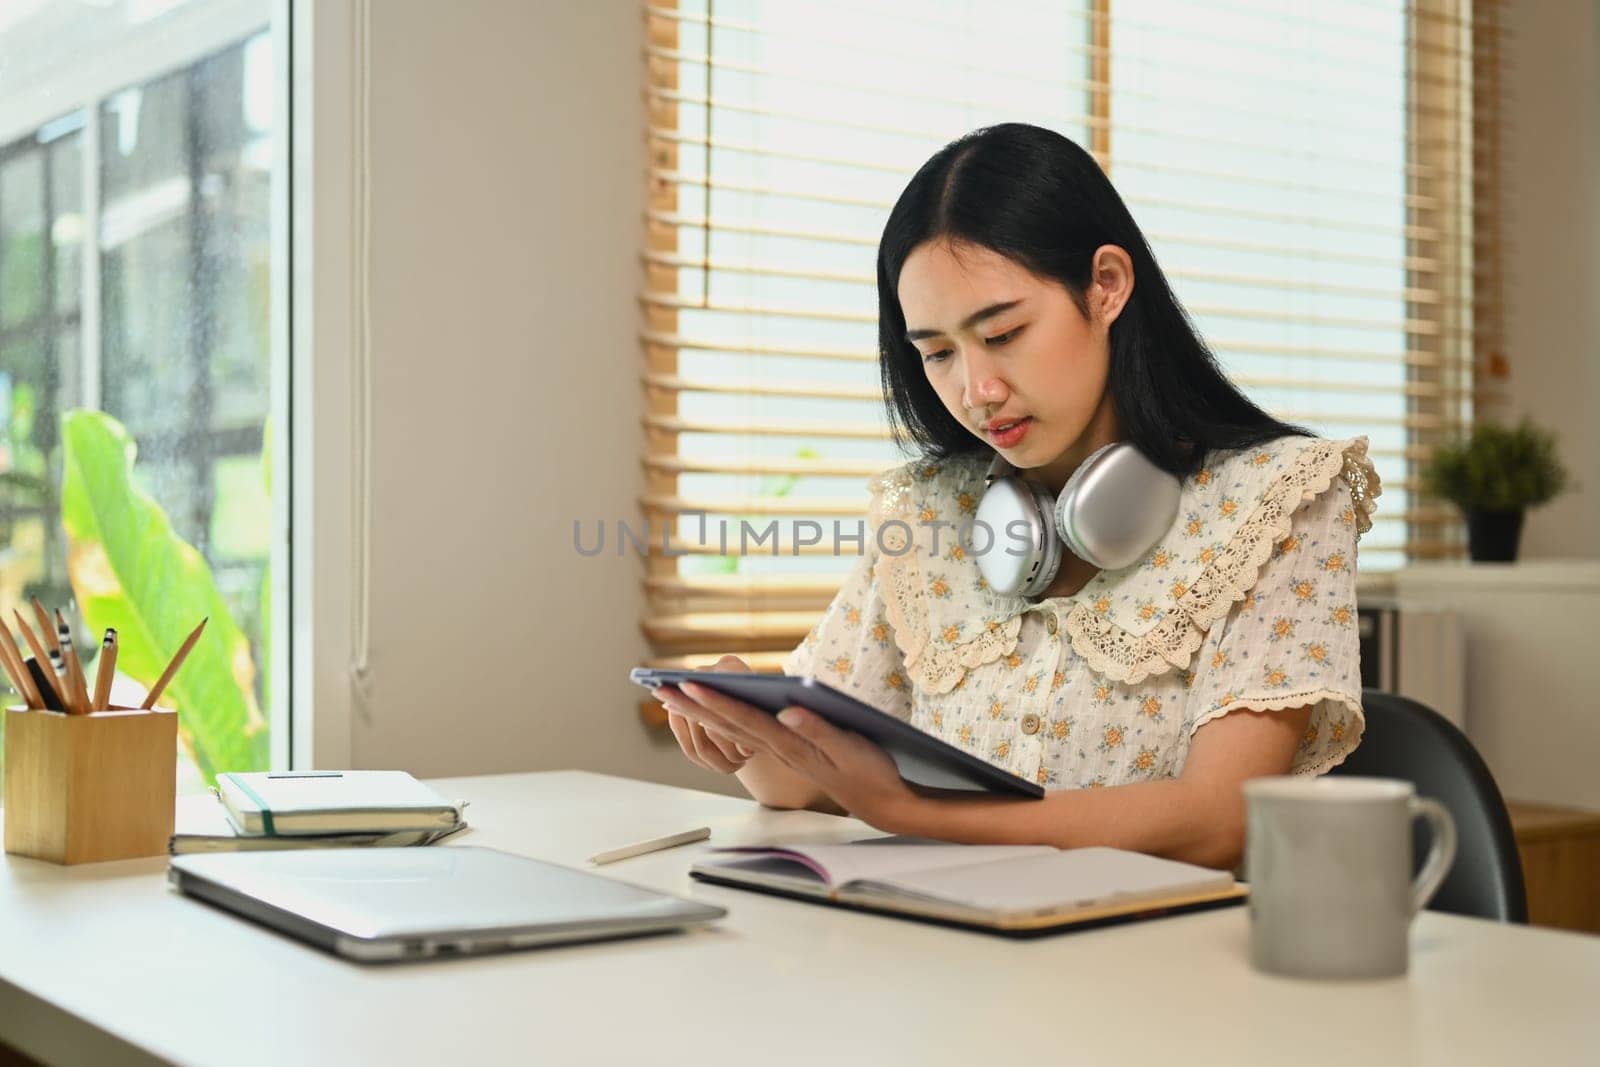 Pretty young Asian woman using digital tablet and making notes, browsing internet, remote work and stying online.